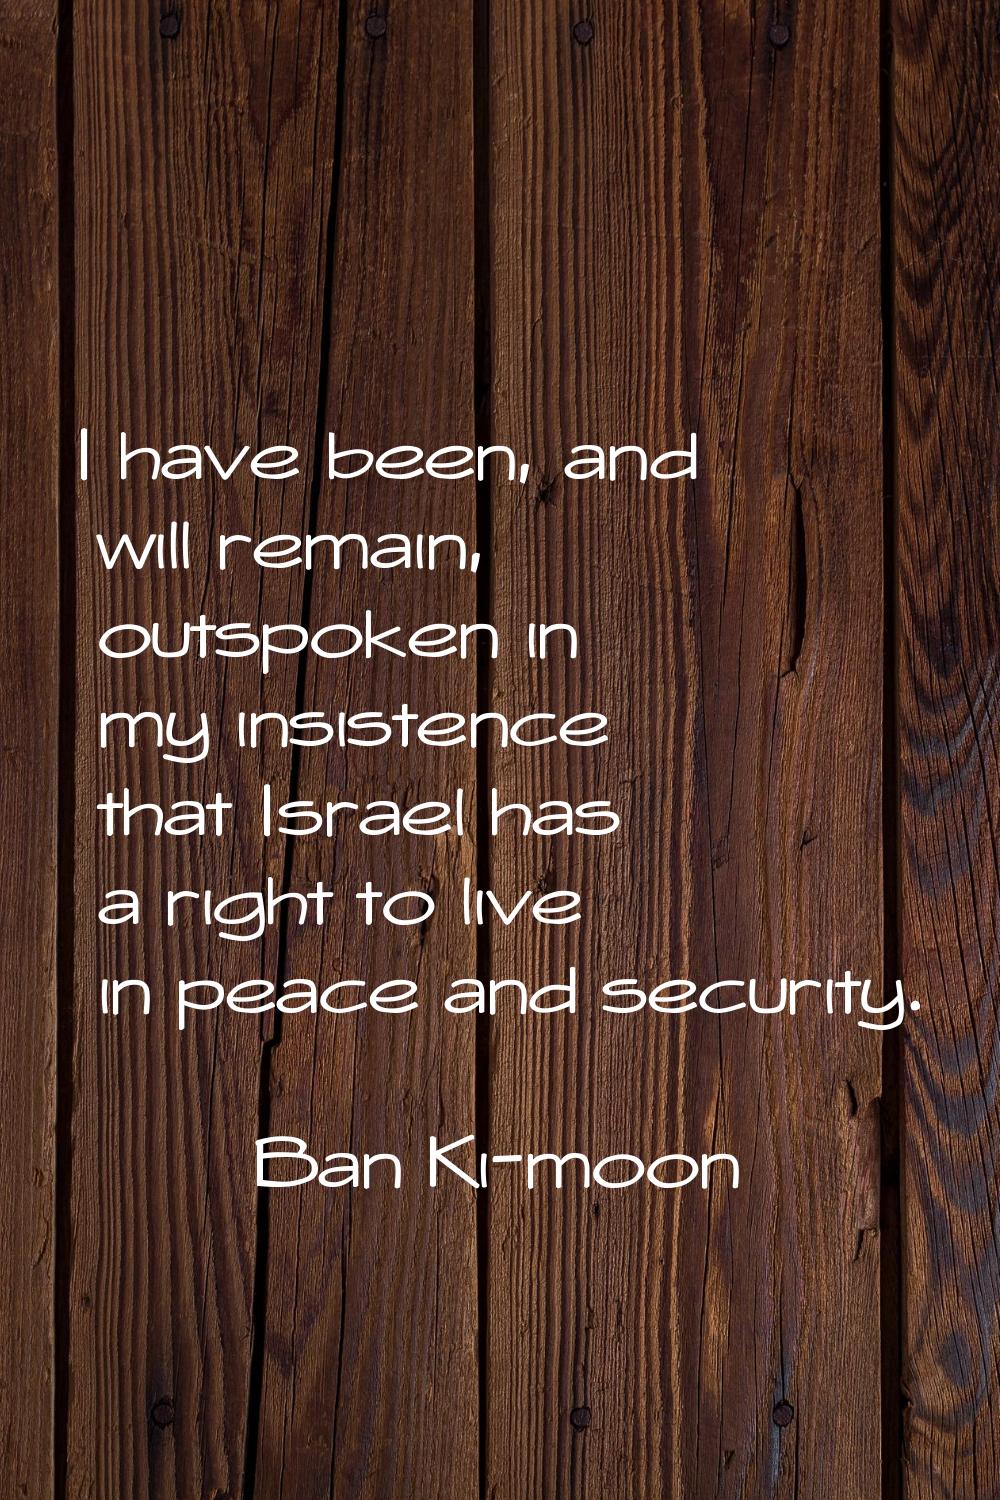 I have been, and will remain, outspoken in my insistence that Israel has a right to live in peace a